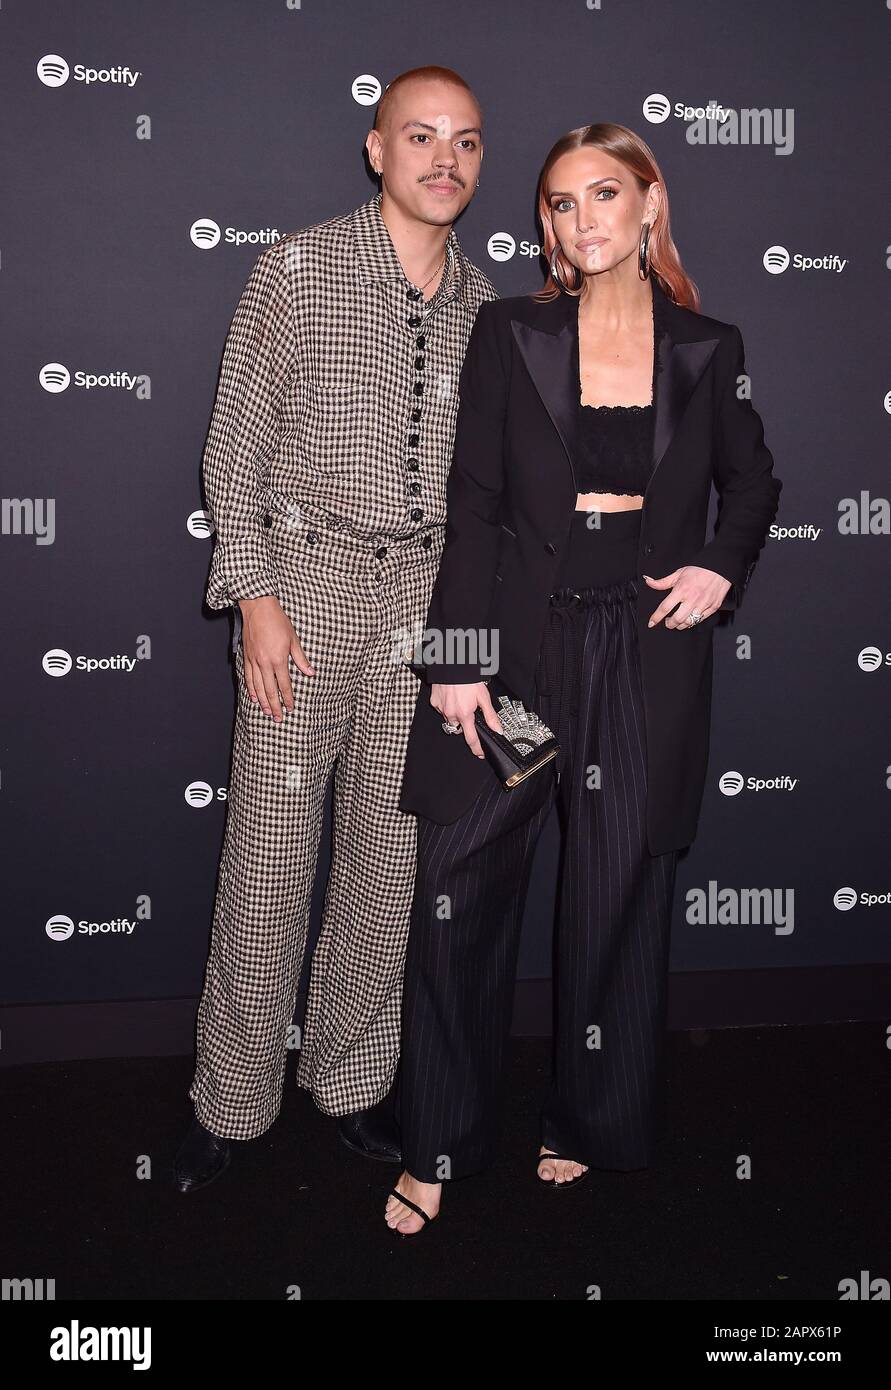 WEST HOLLYWOOD, CA - JANUARY 23: Evan Ross and Ashlee Simpson attend at the Spotify Best New Artist 2020 Party at The Lot Studios on January 23, 2020 in Los Angeles, California. Stock Photo